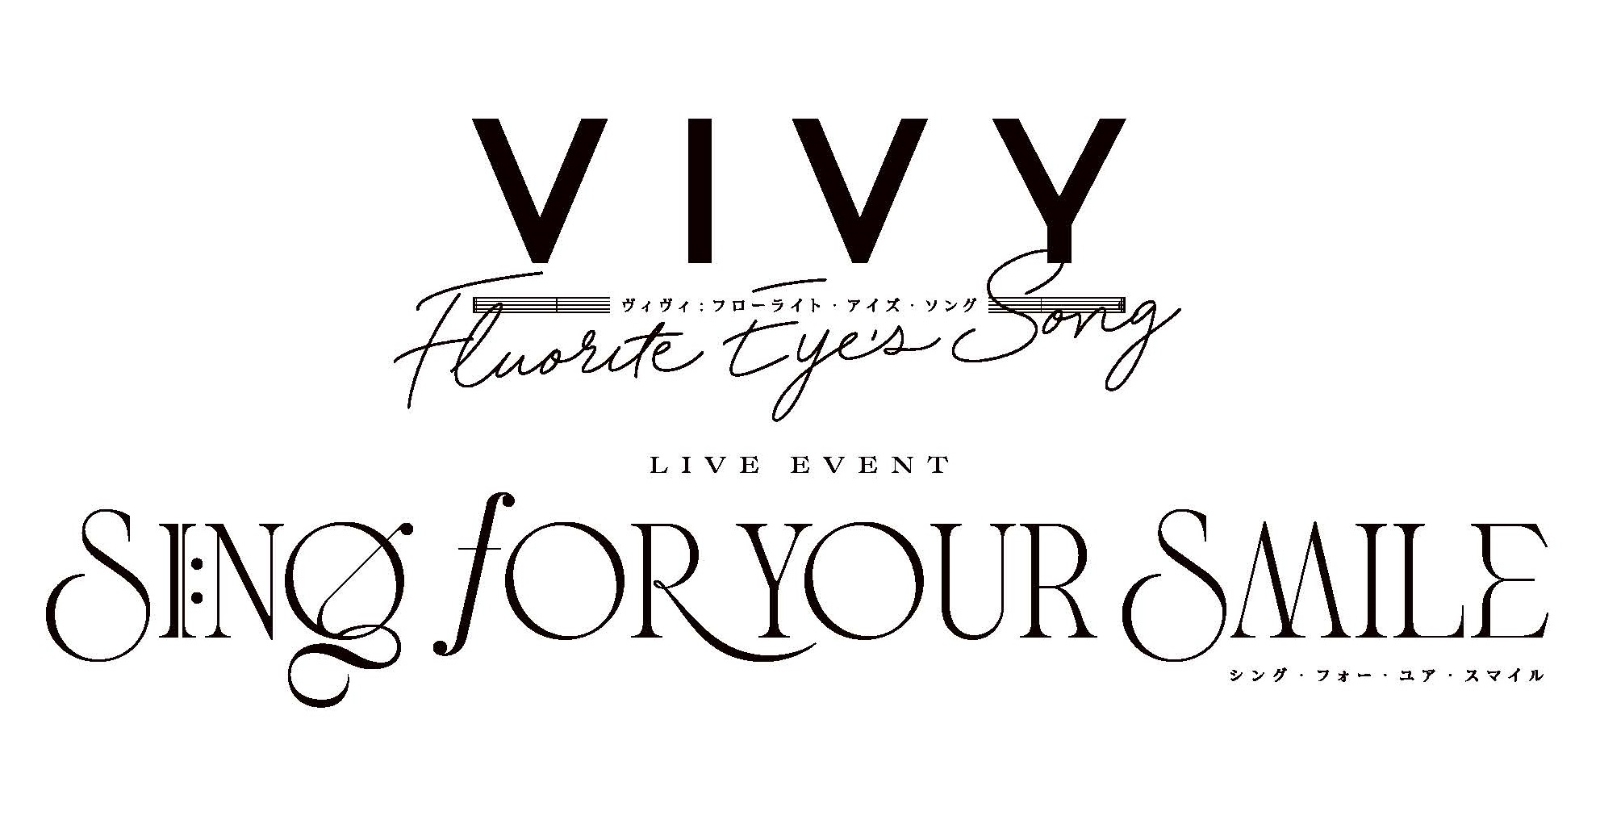 Vivy -Fluorite Eye's Song- Live Event 〜Sing for Your Smile〜【完全生産限定版】【Blu-ray】画像